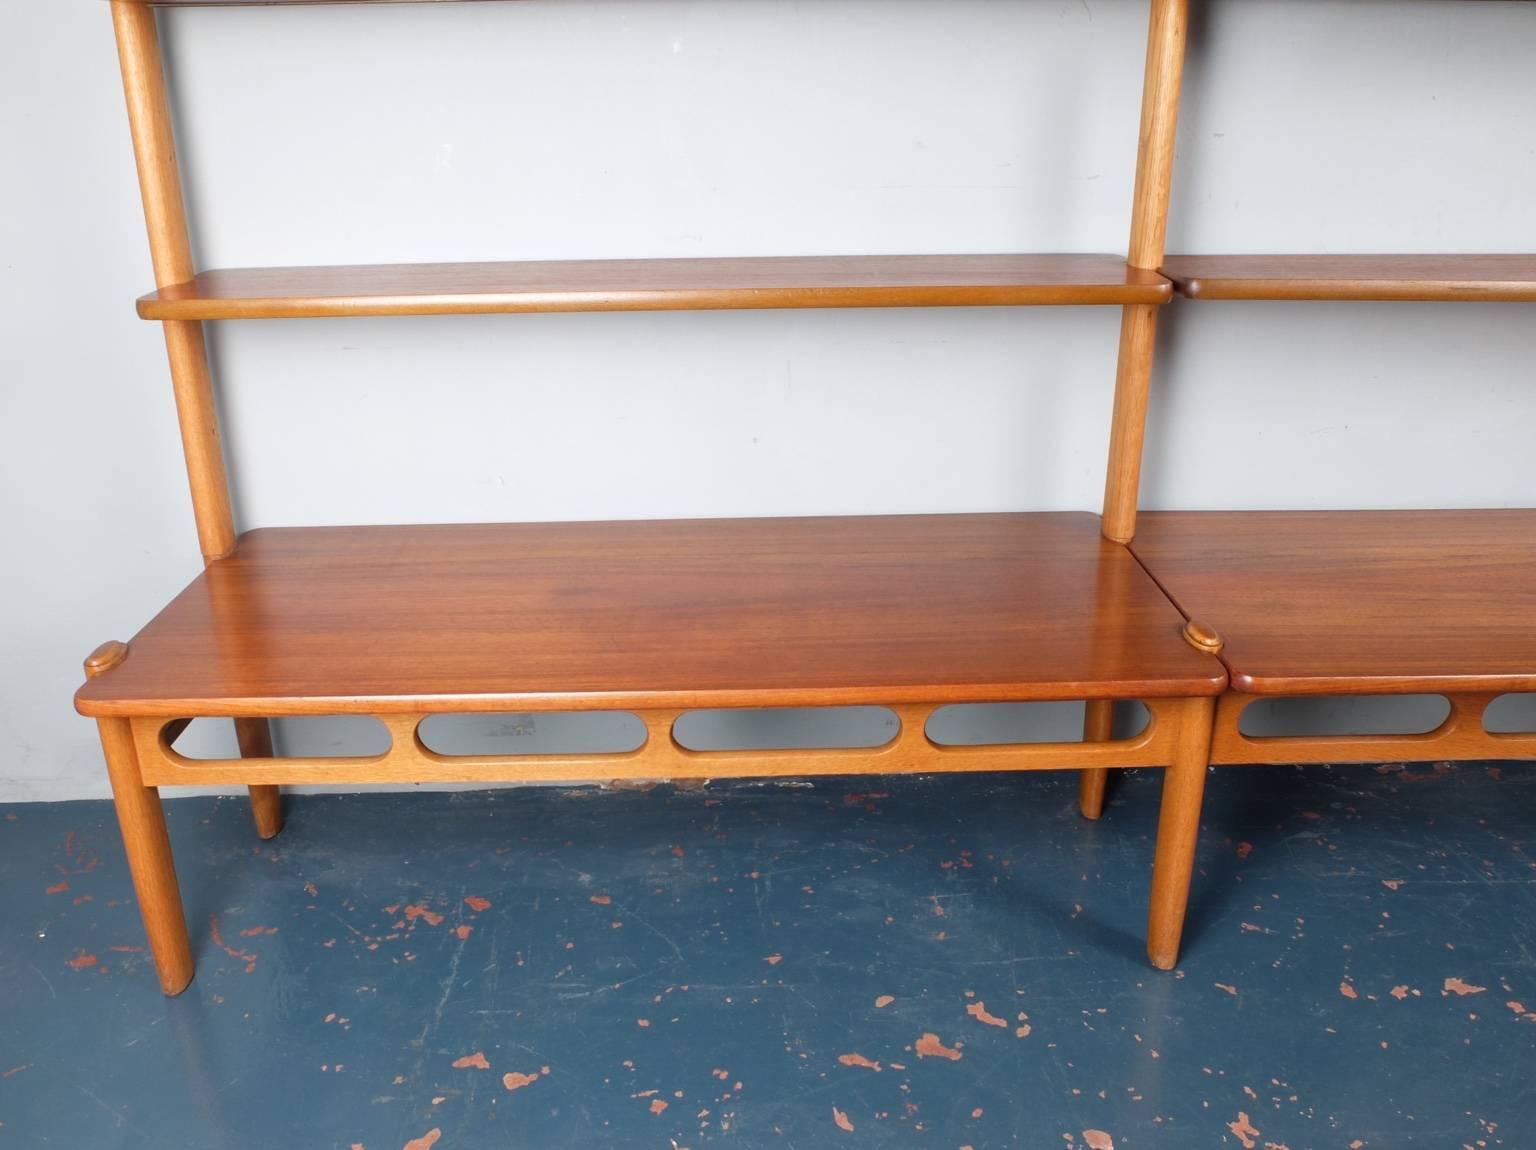 Designed by American born William Watting and produced by Mikael Laursen
this is the model 85 wall shelving unit. This Danish 1960s piece consists of ten teak shelves supported by three oak uprights and an oak under-frame. The shelves themselves